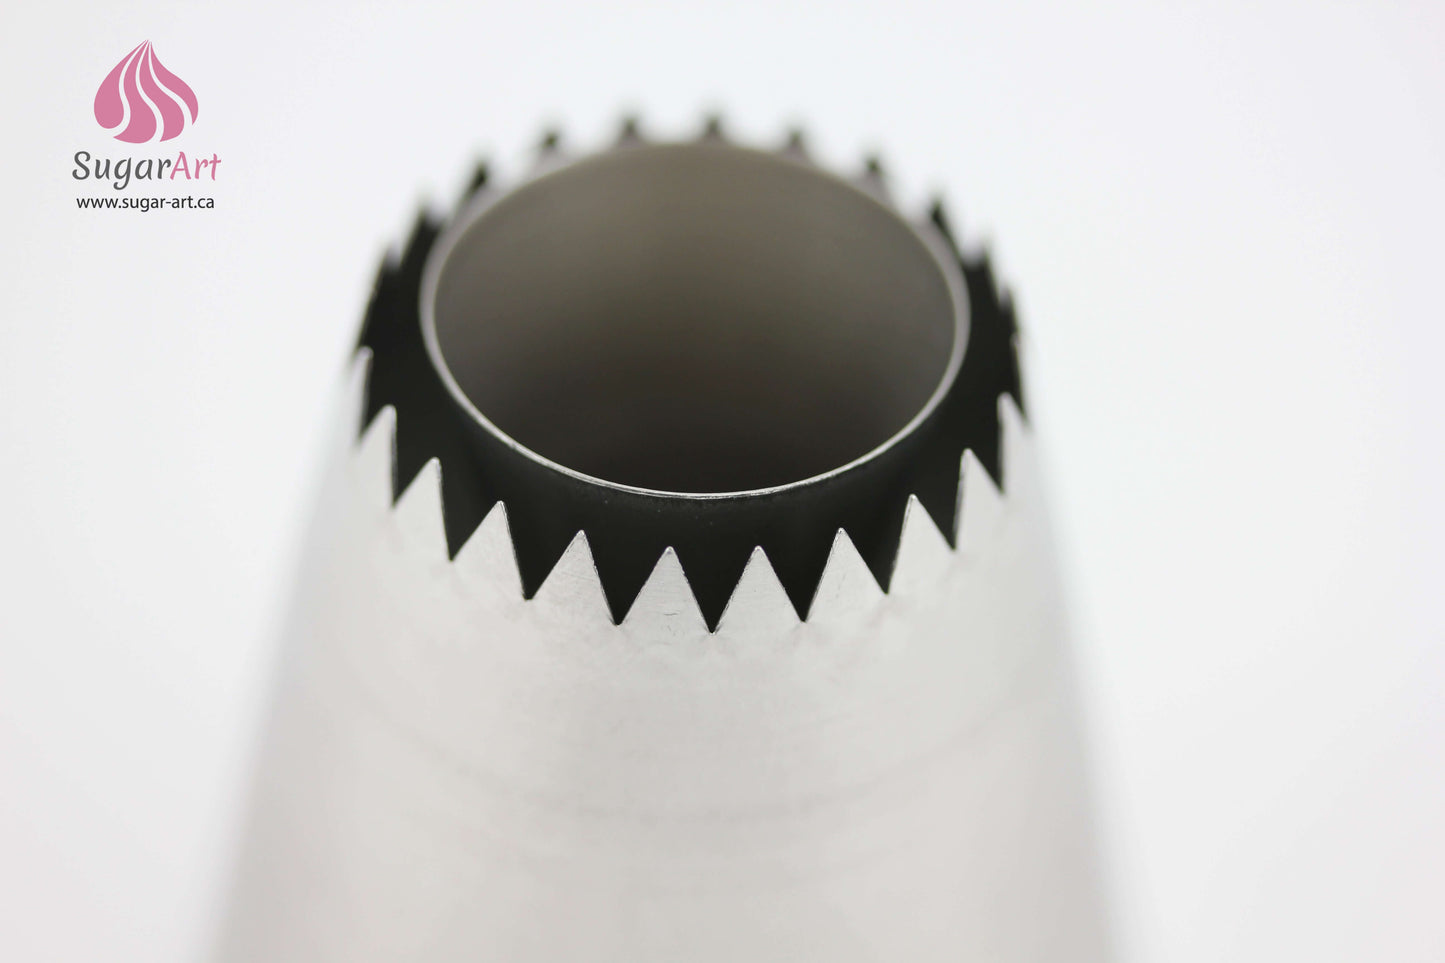 Closed "Sultane" Piping Nozzle 795 - BSUPP008.